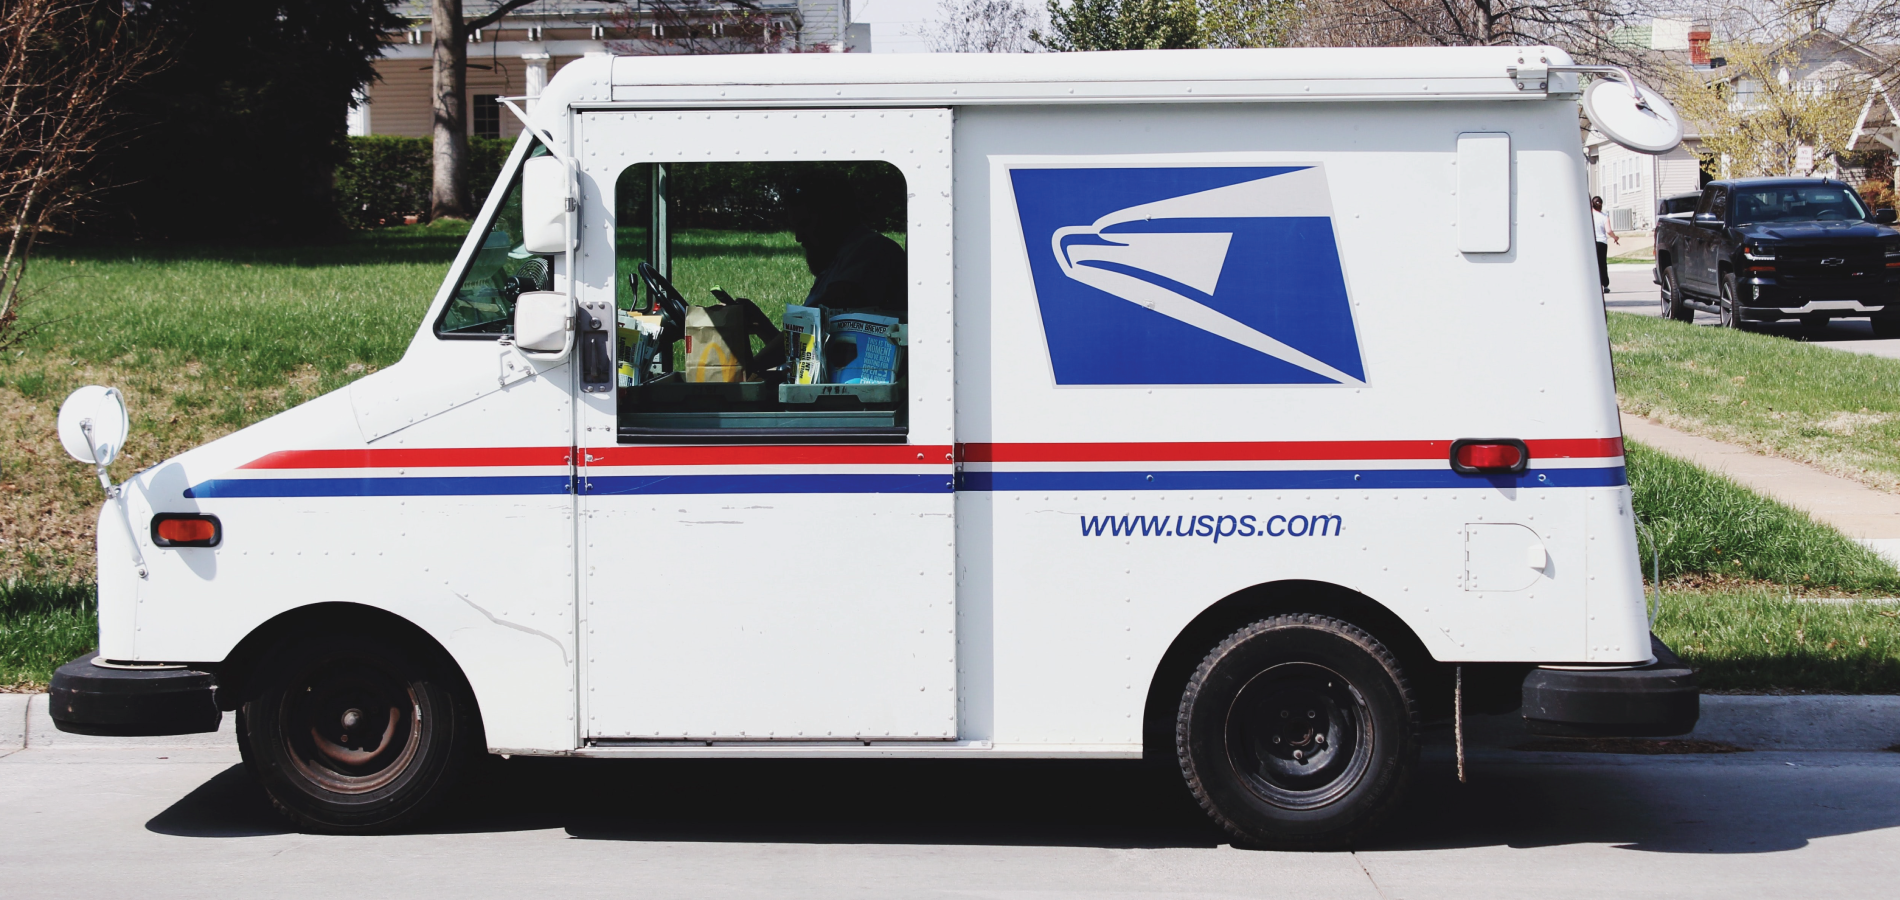 image of USPS truck